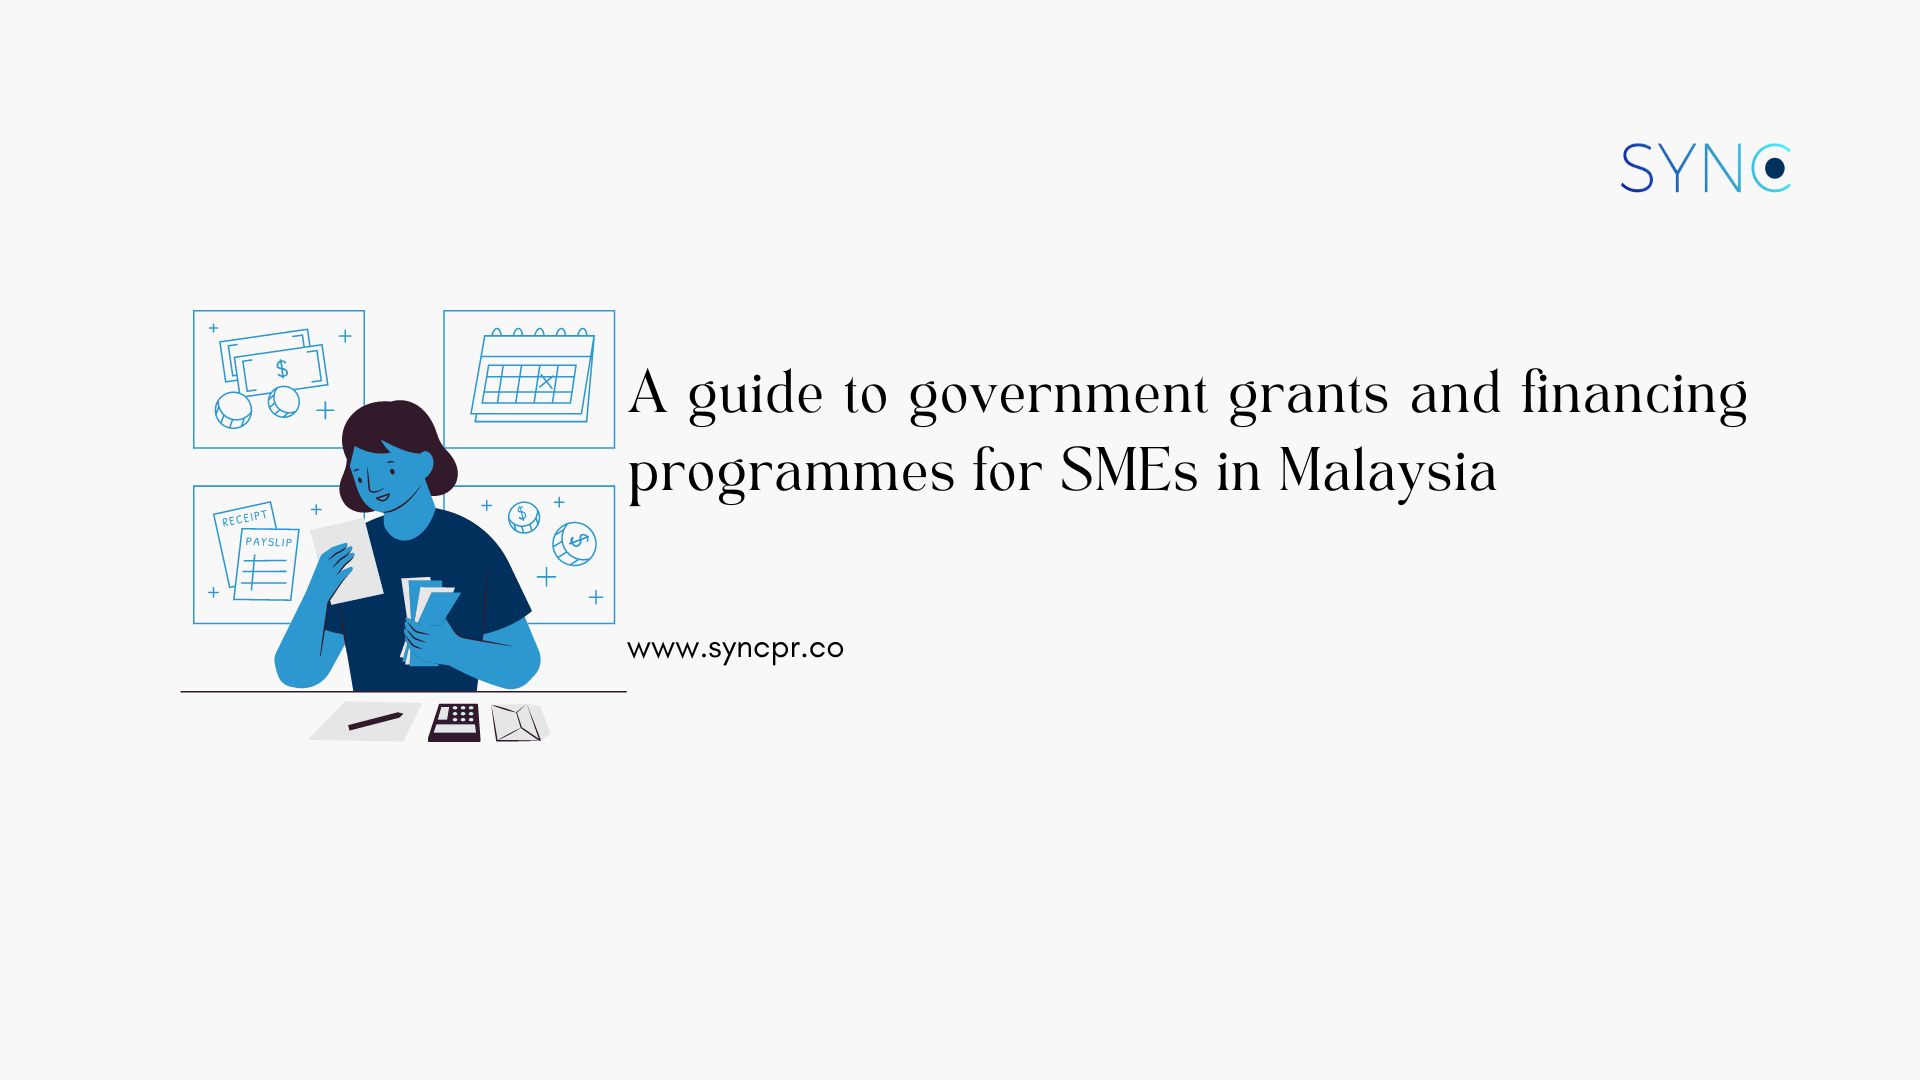 SMEs in Malaysia